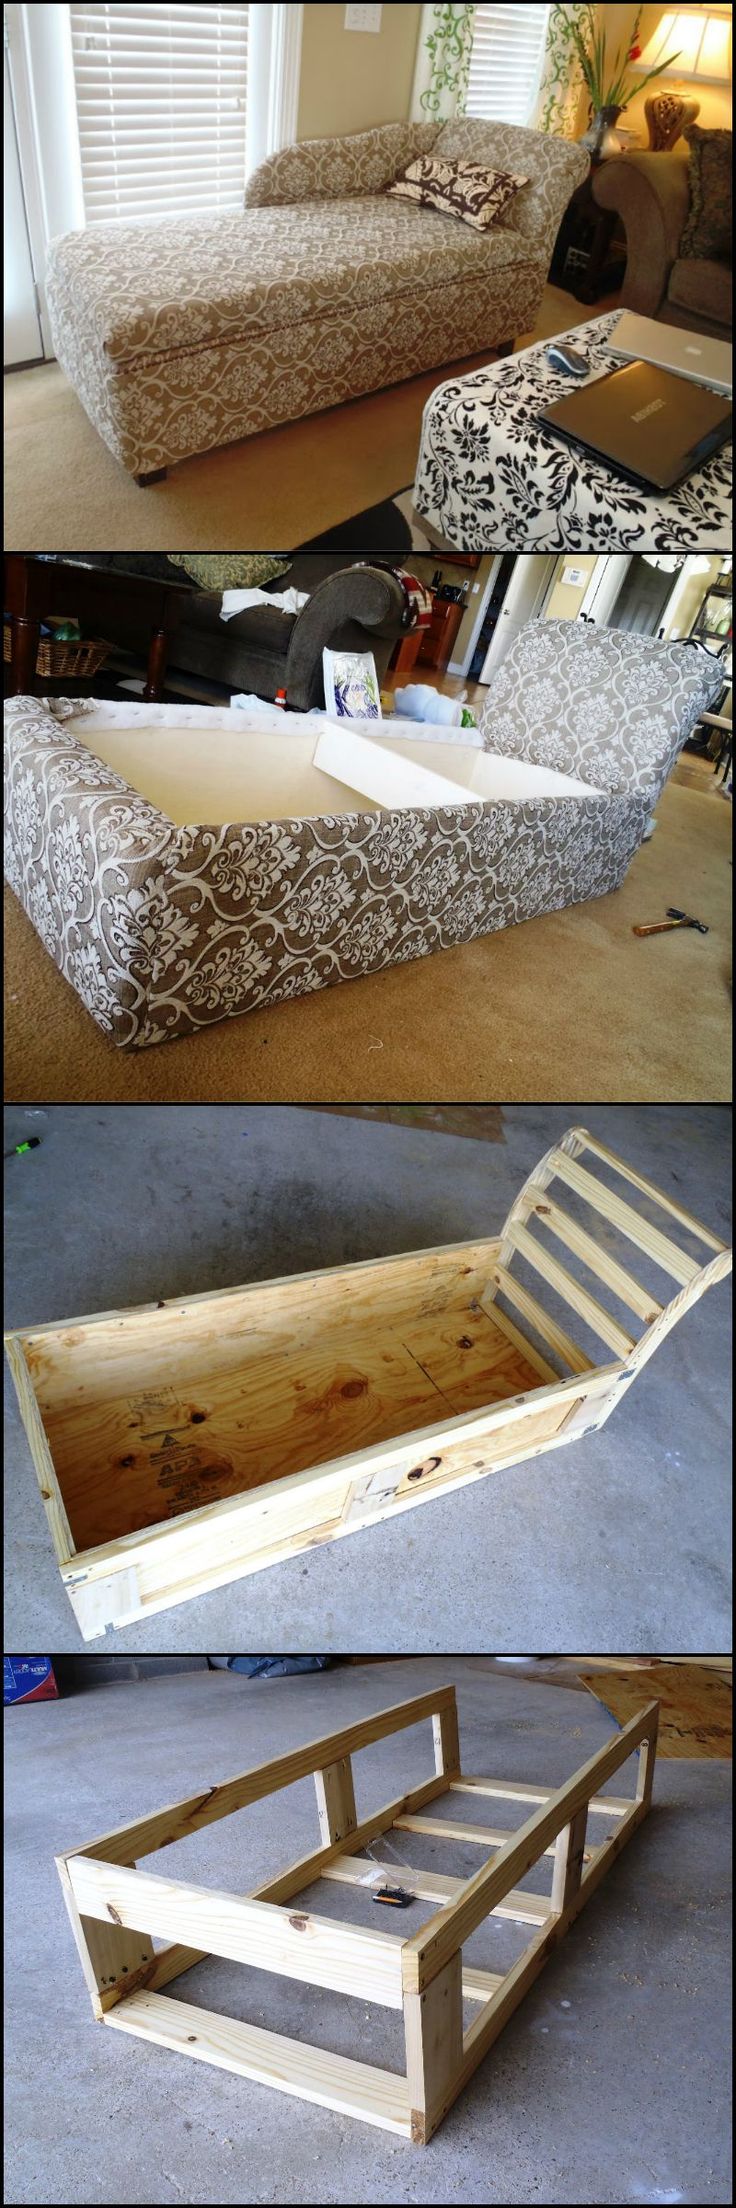 How To Build A Chaise Lounge With Extra Storage Space  theownerbuilderne...  We'...